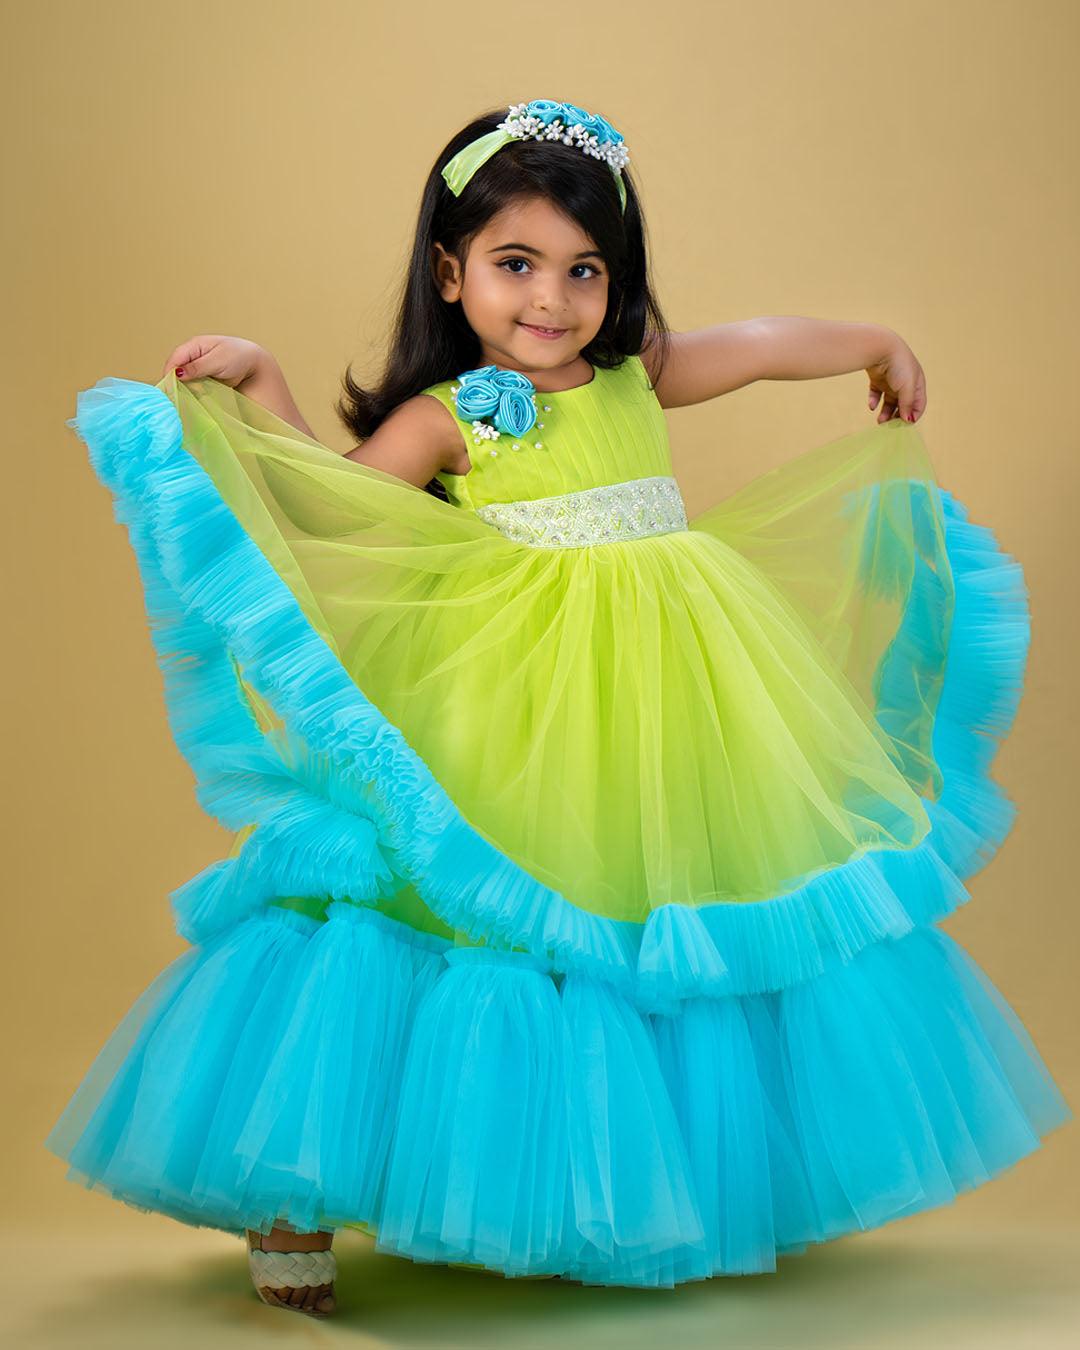 Lime Green & Skyblue Combo Pleated Ruffles Gown - Matching Hair Band
Material : Pista Green and Sky Blue combination gown. Yoke portion is done by pleated pista green net and premium quality satin is used for the primary lining. Shou